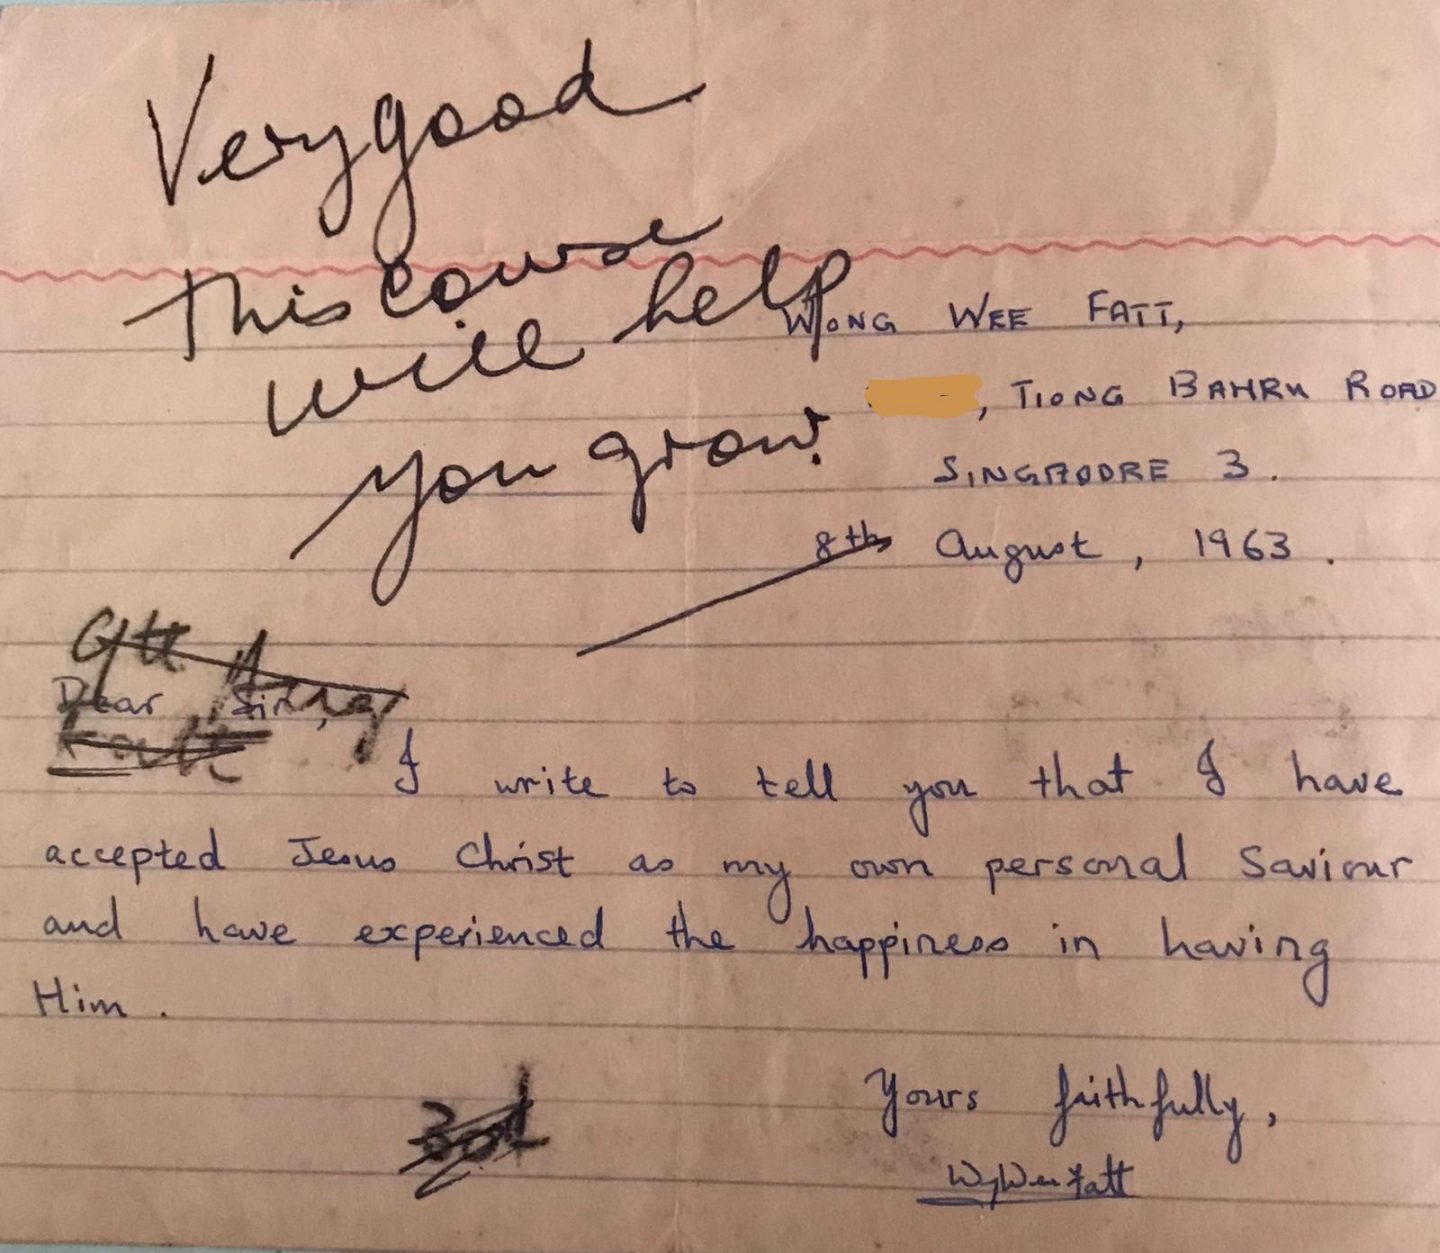 The note written by 14-year-old David Wong, and the scrawled reply from the anonymous writer. "The date is a reminder of the day that I made commitment to Christ," said Ps David.